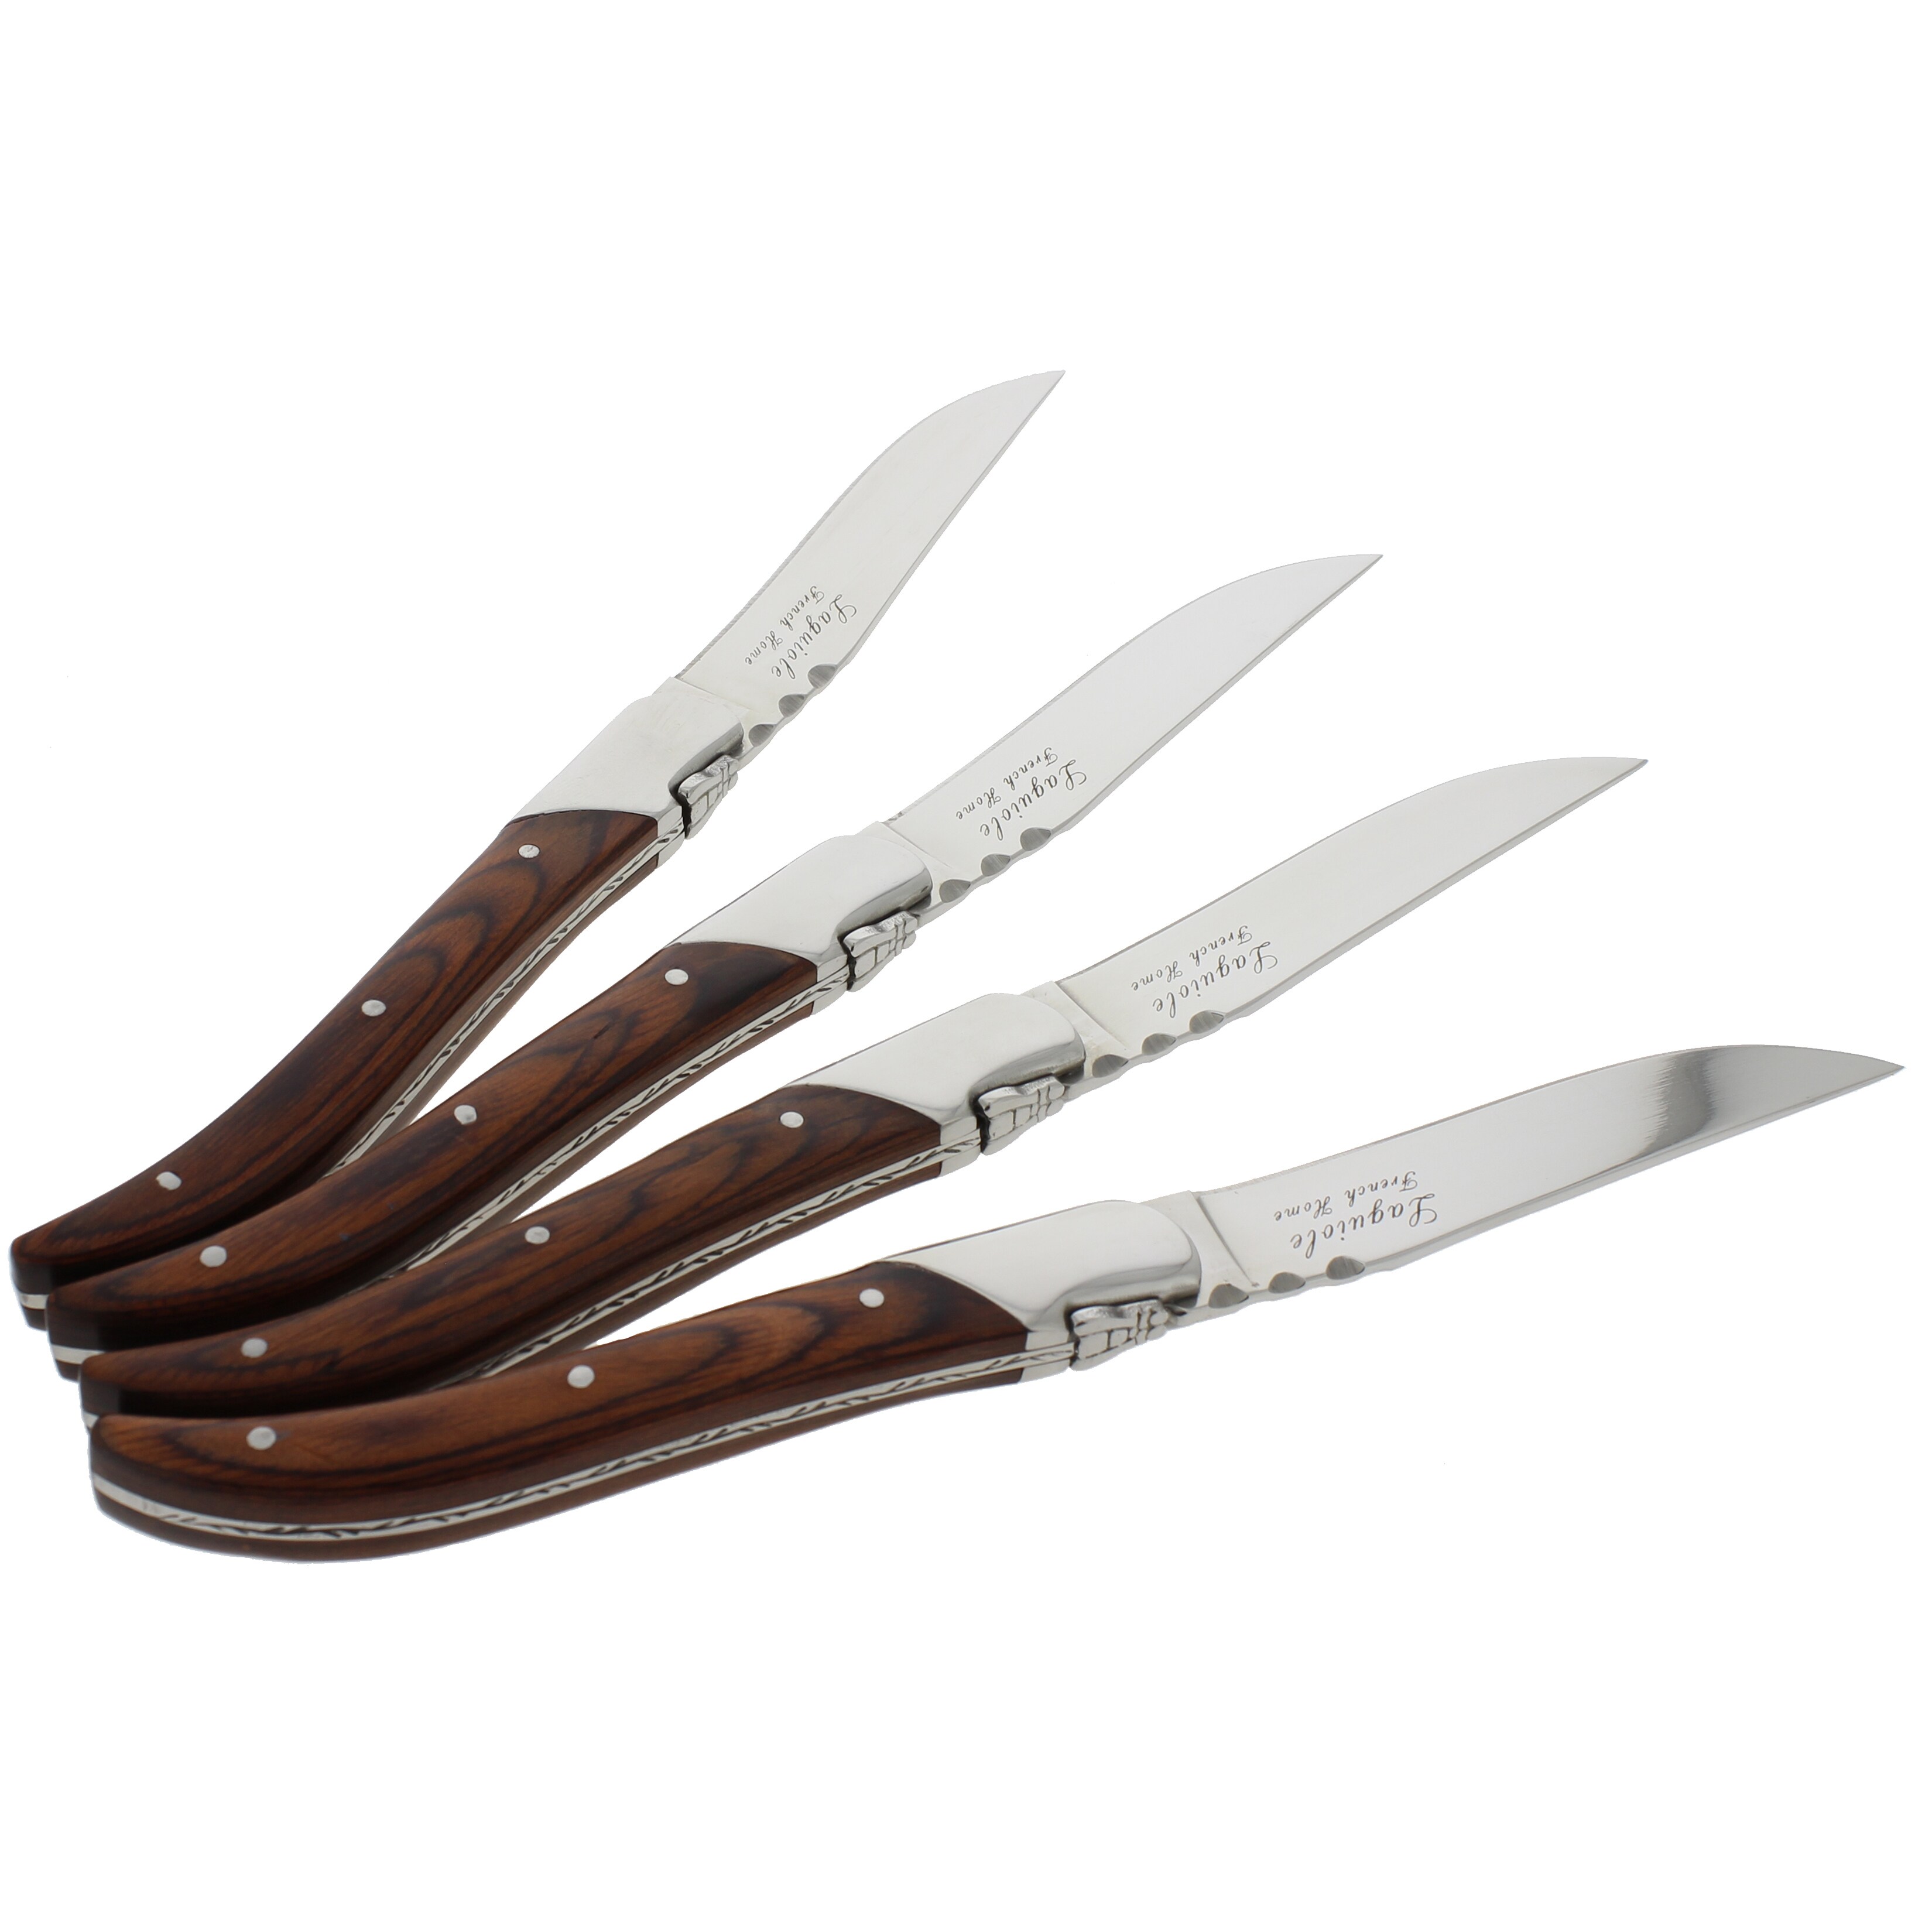 https://ak1.ostkcdn.com/images/products/10701107/French-Home-Set-of-4-Laguiole-Connoisseur-Rosewood-Steak-Knives-a6f5ba3c-5d0f-4d1b-a3ae-52220961cdf0.jpg